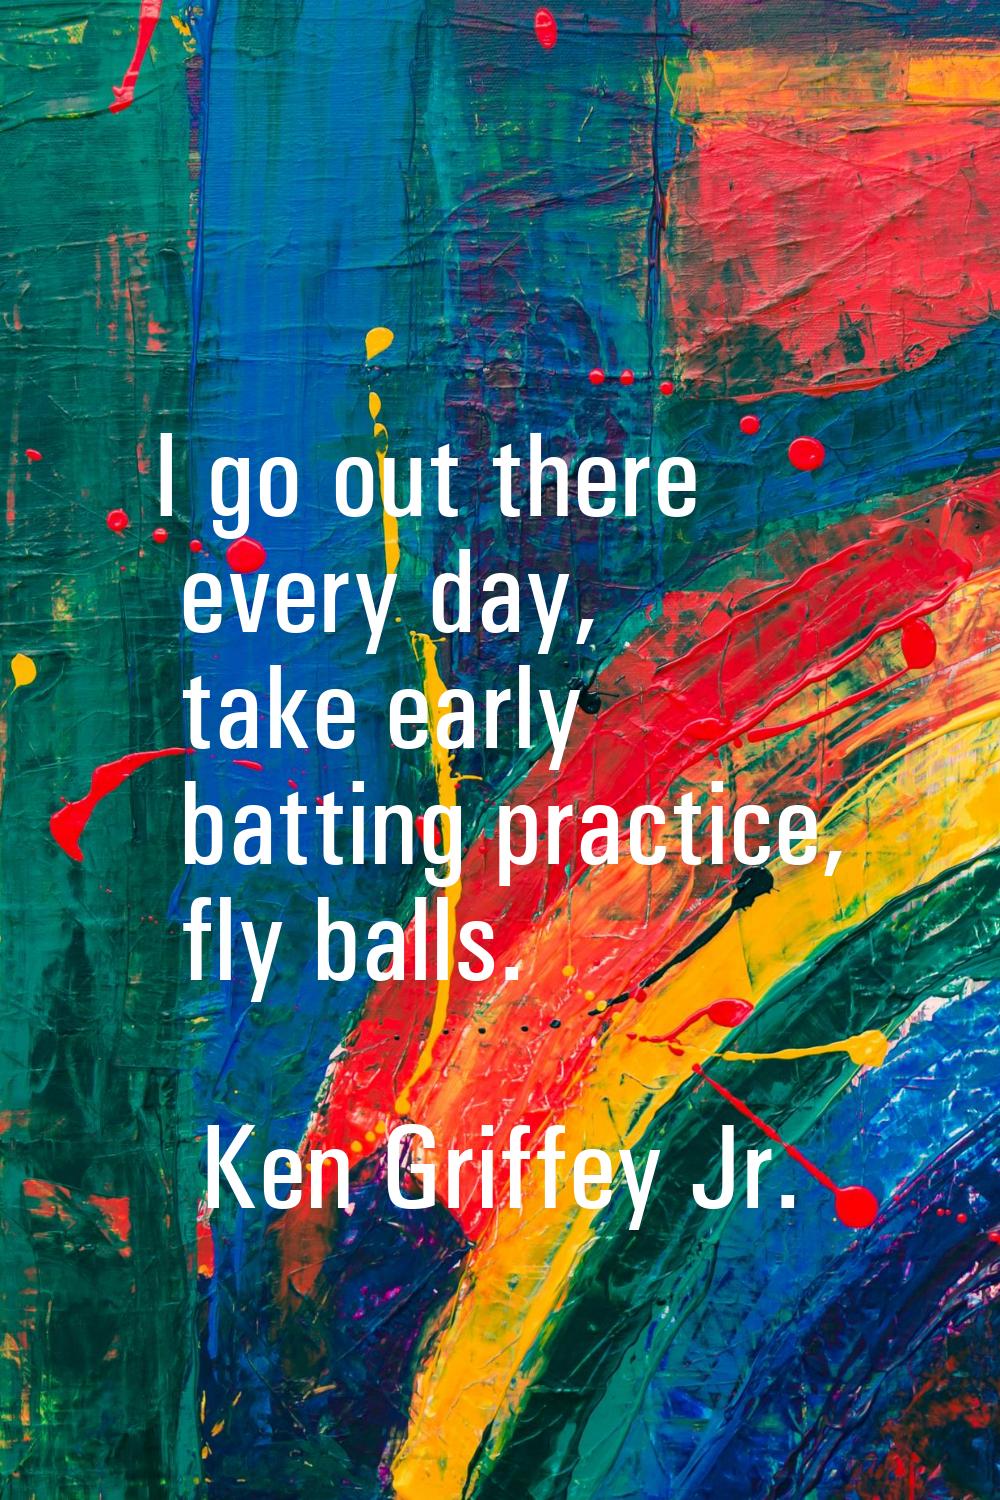 I go out there every day, take early batting practice, fly balls.